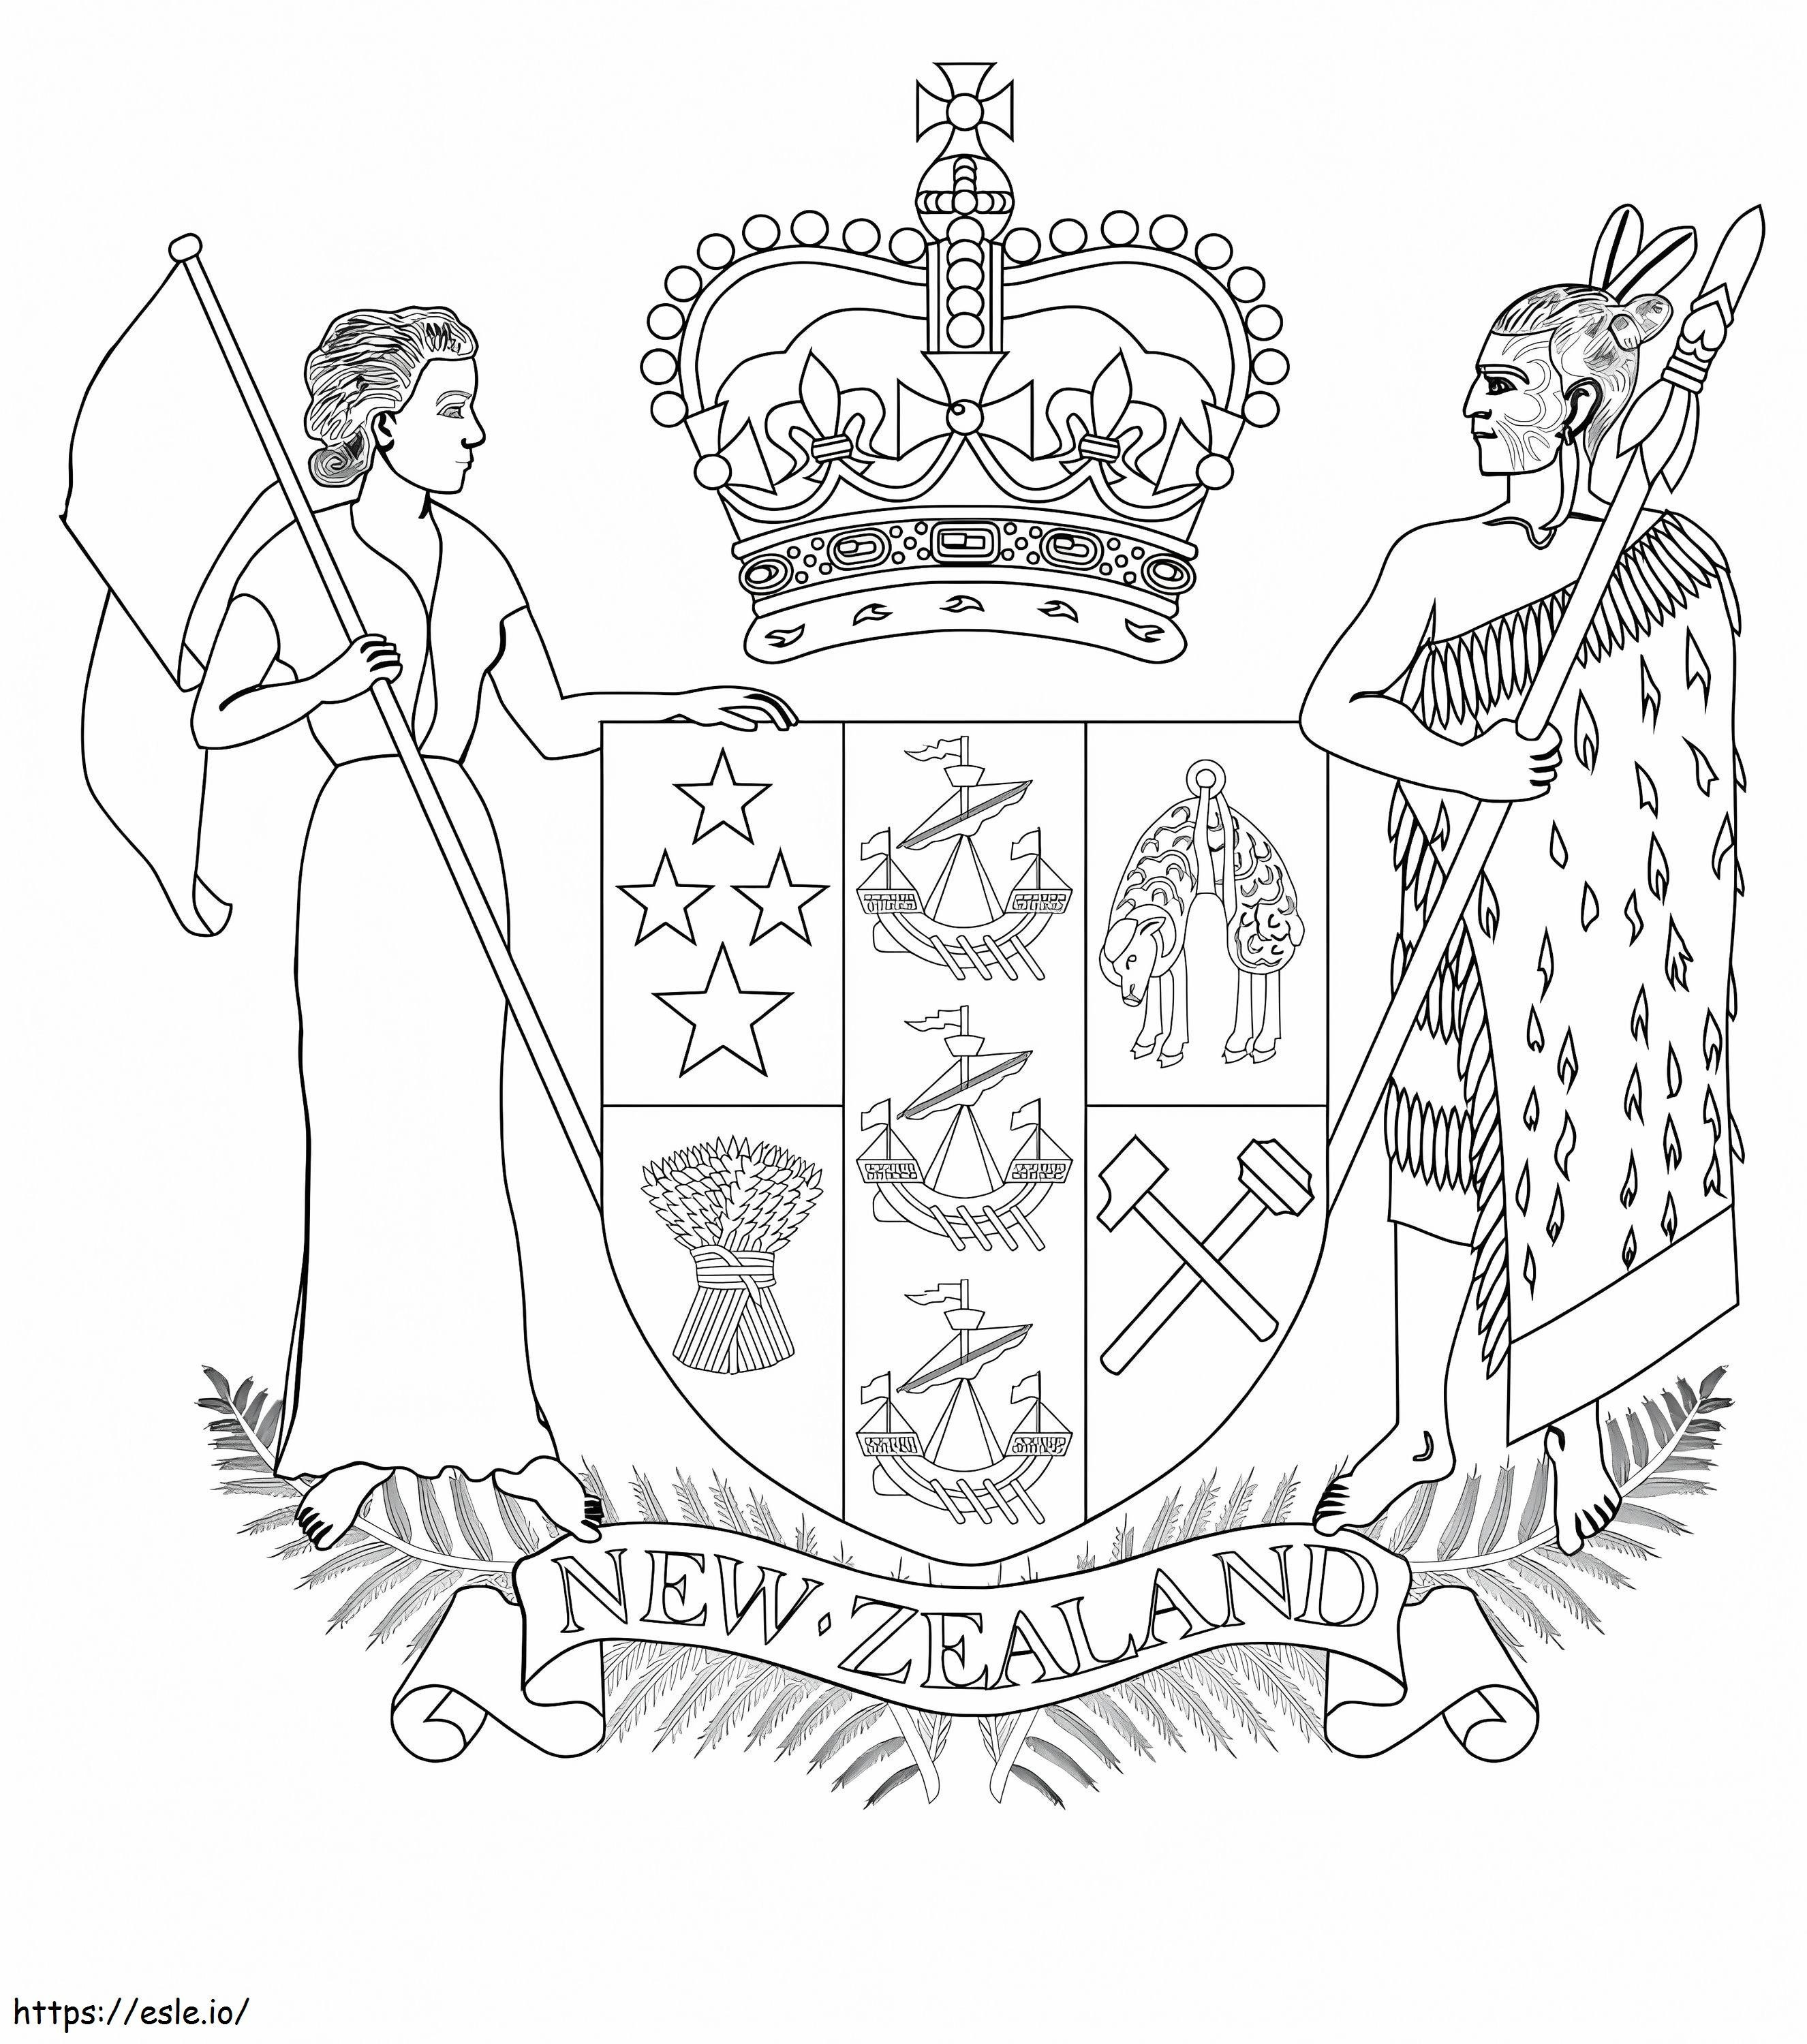 New Zealand Coat Of Arms coloring page